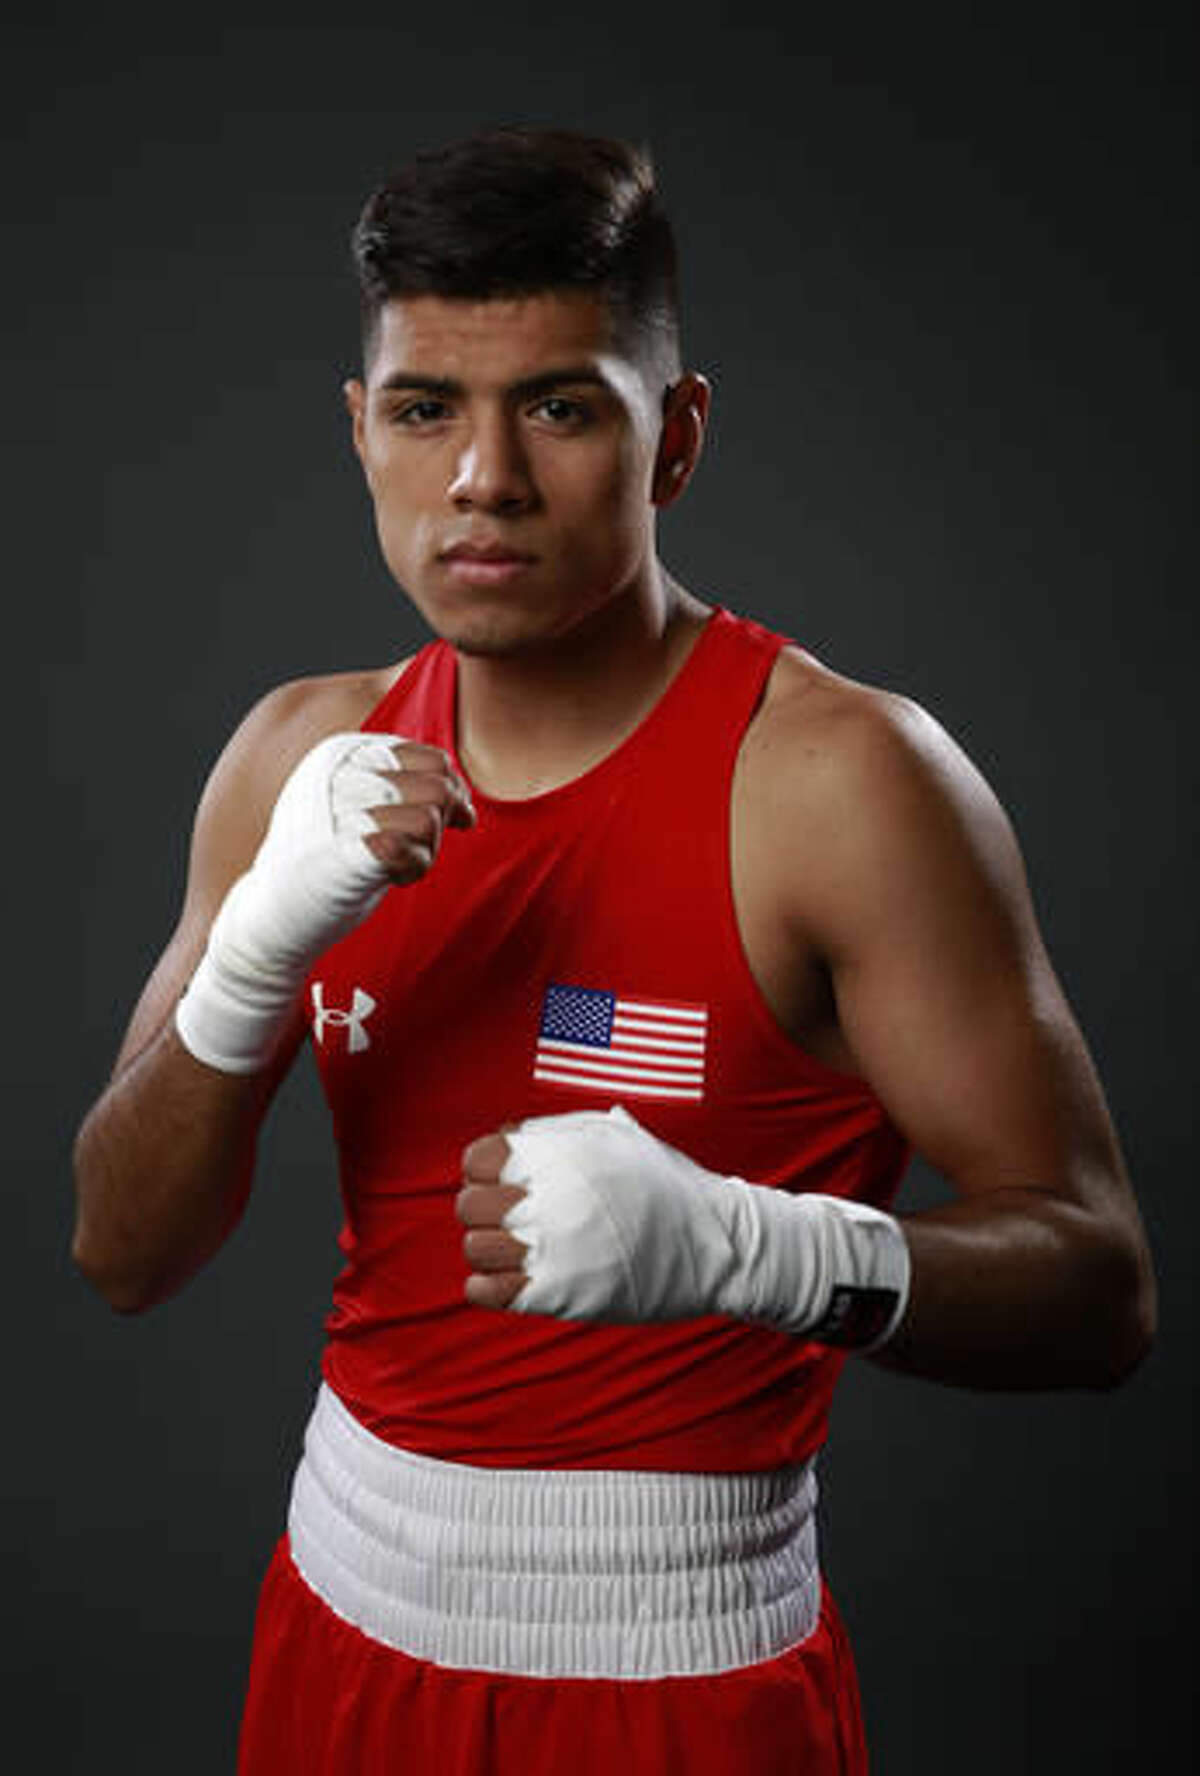 This photo taken March 9, 2016, shows USA Boxing team member Carlos Balderas posing for photo at the 2016 Team USA Media Summit in Beverly Hills, Calif. Balderas has signed with Ringstar Sports, the new promotional venture of veteran boxing executive Richard Schaefer. Ringstar announced its first signing Monday, Nov. 7, 2016. (AP Photo/Damian Dovarganes)